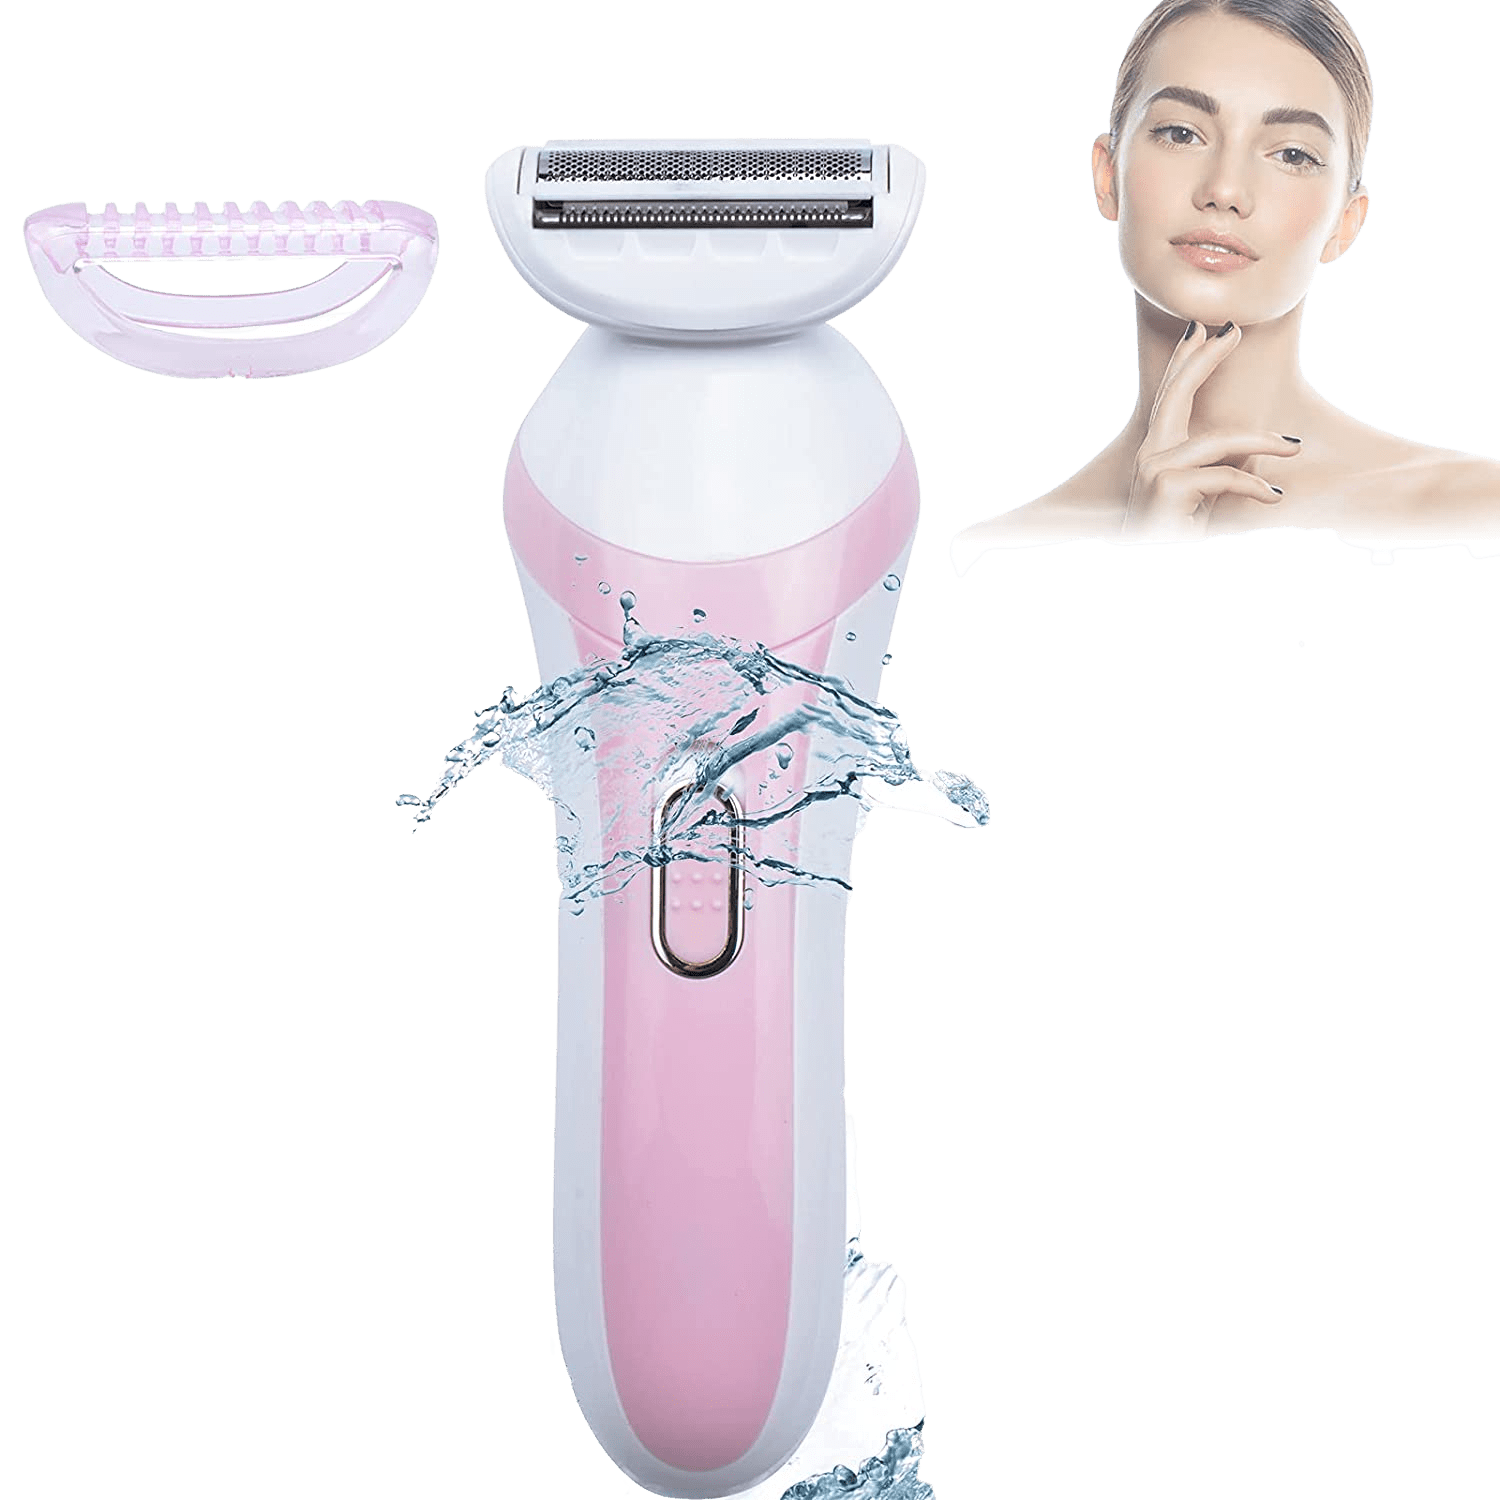 Electric Razor for Women, Portable Electric Shaver for Women for Pubic Hair Bikini Trimmer, Electric Razor for Women for Legs Body Hair Removal for Shaving Legs, Bikini Line, Arms and Underar - Home Decor Gifts and More